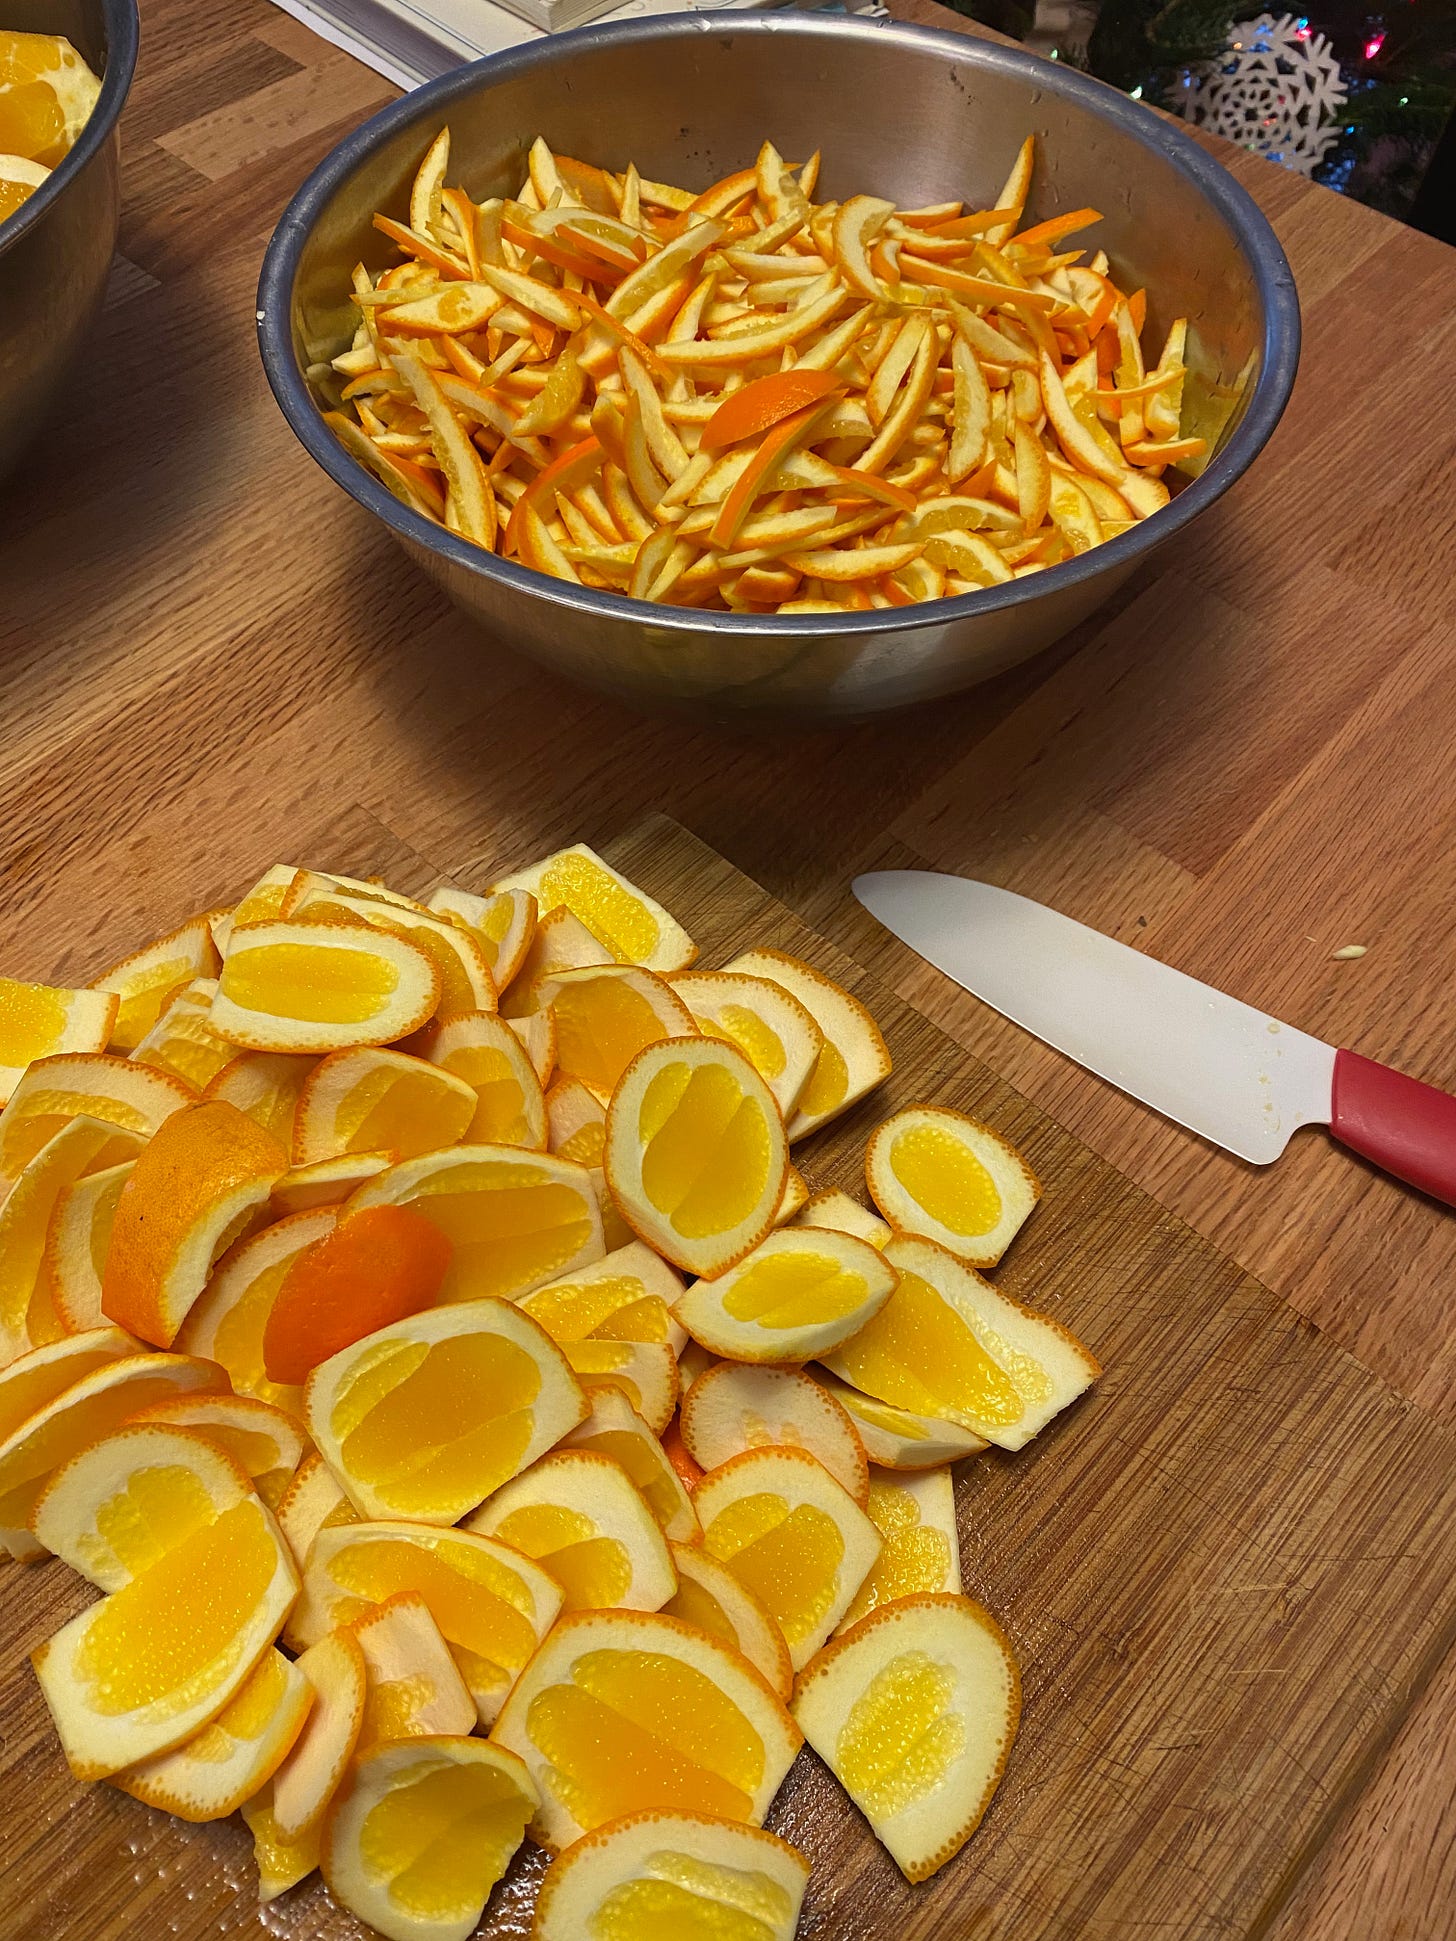 A large silver bowl full of slivered orange peel sits on a wooden counter next to a pile of large pieces of uncut peel.